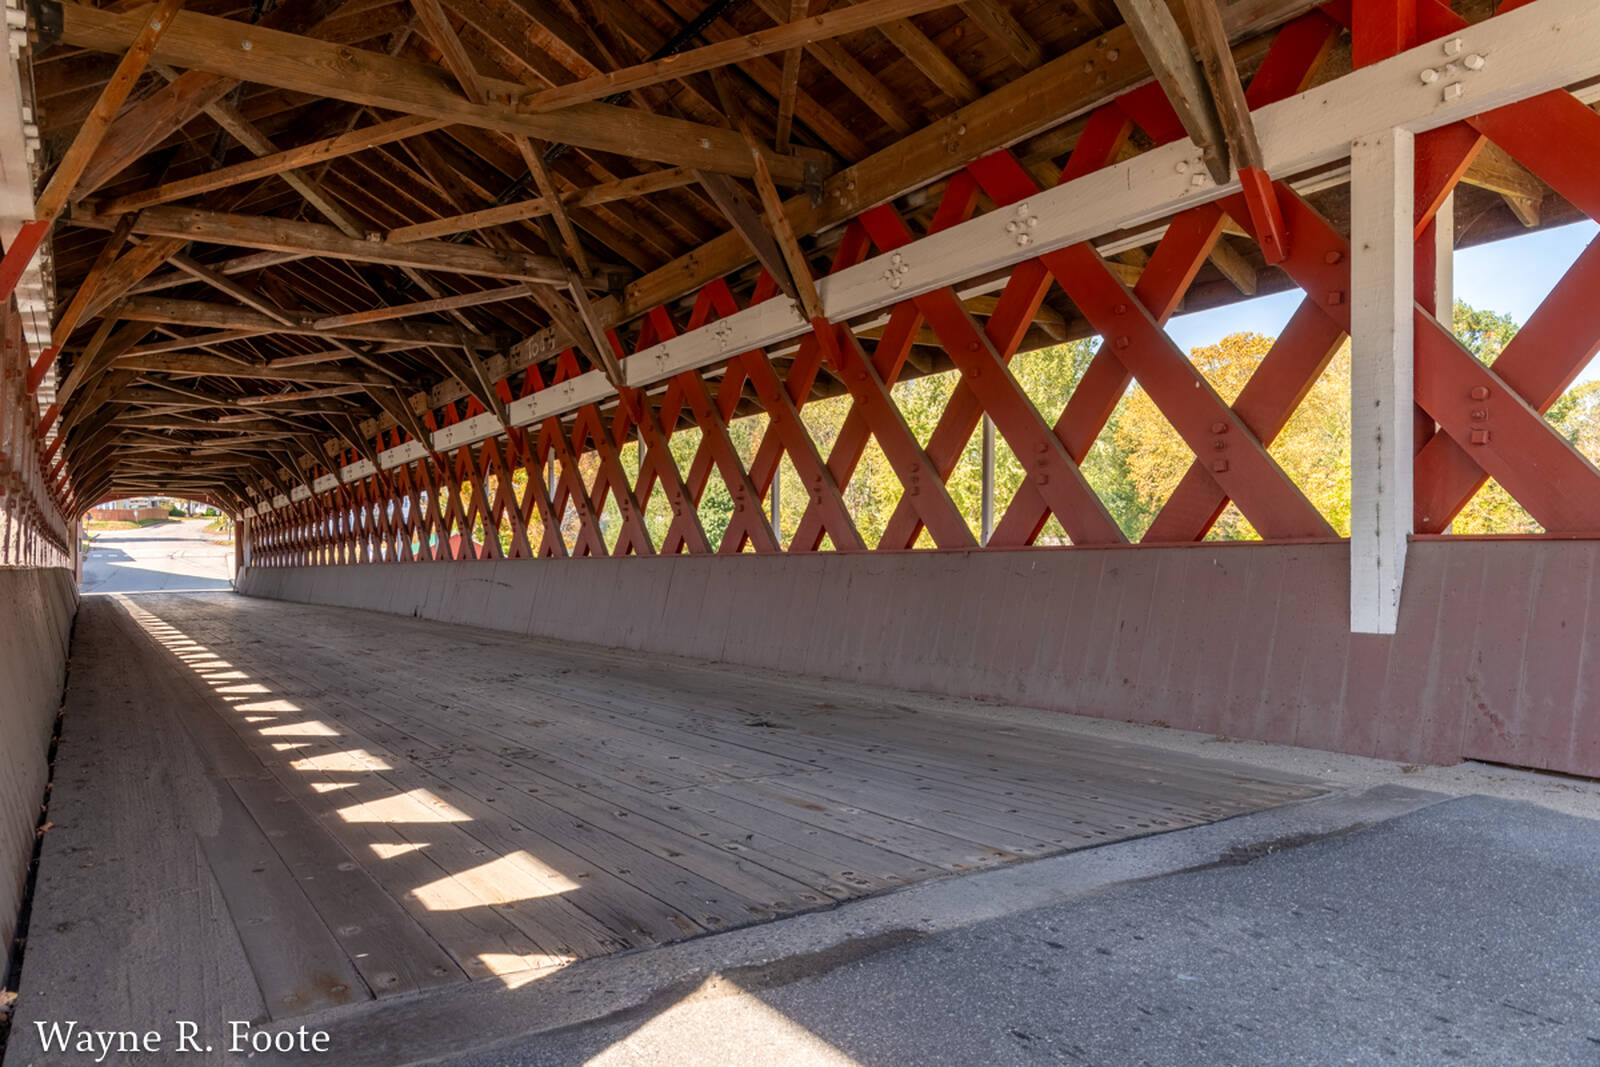 Image of Thompson Covered Bridge by Wayne Foote